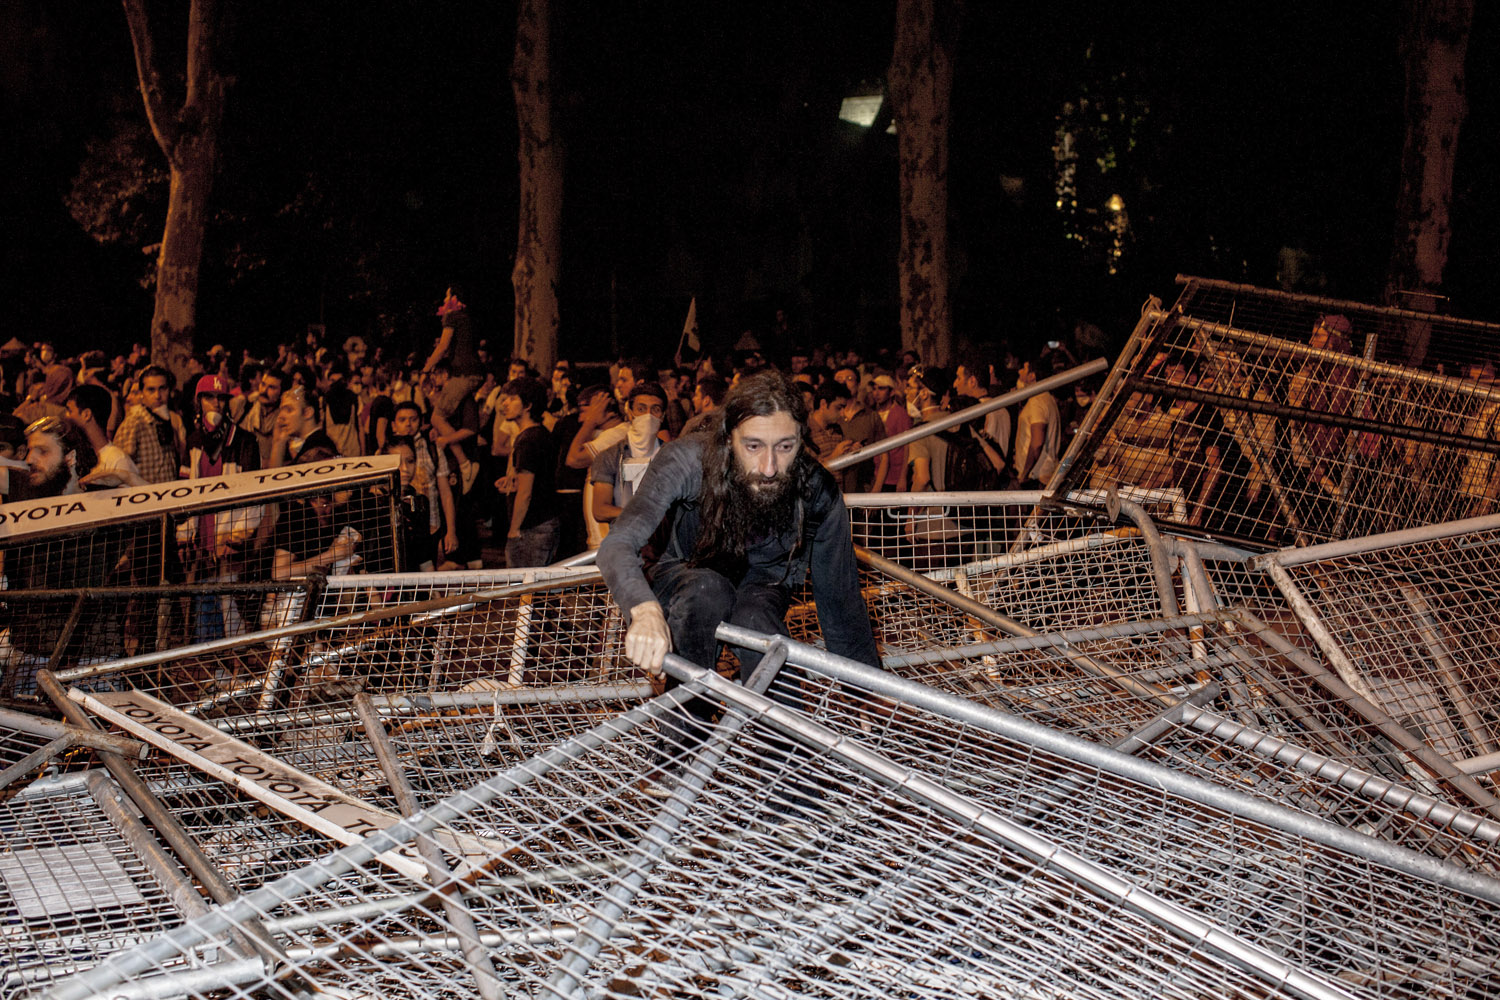 An anti-government protester attempts to build a barricade to stop the riot police from advancing in the Besiktas area of Istanbul. At this stage, the protesters were a mix of anarchists, football fans and bystanders.